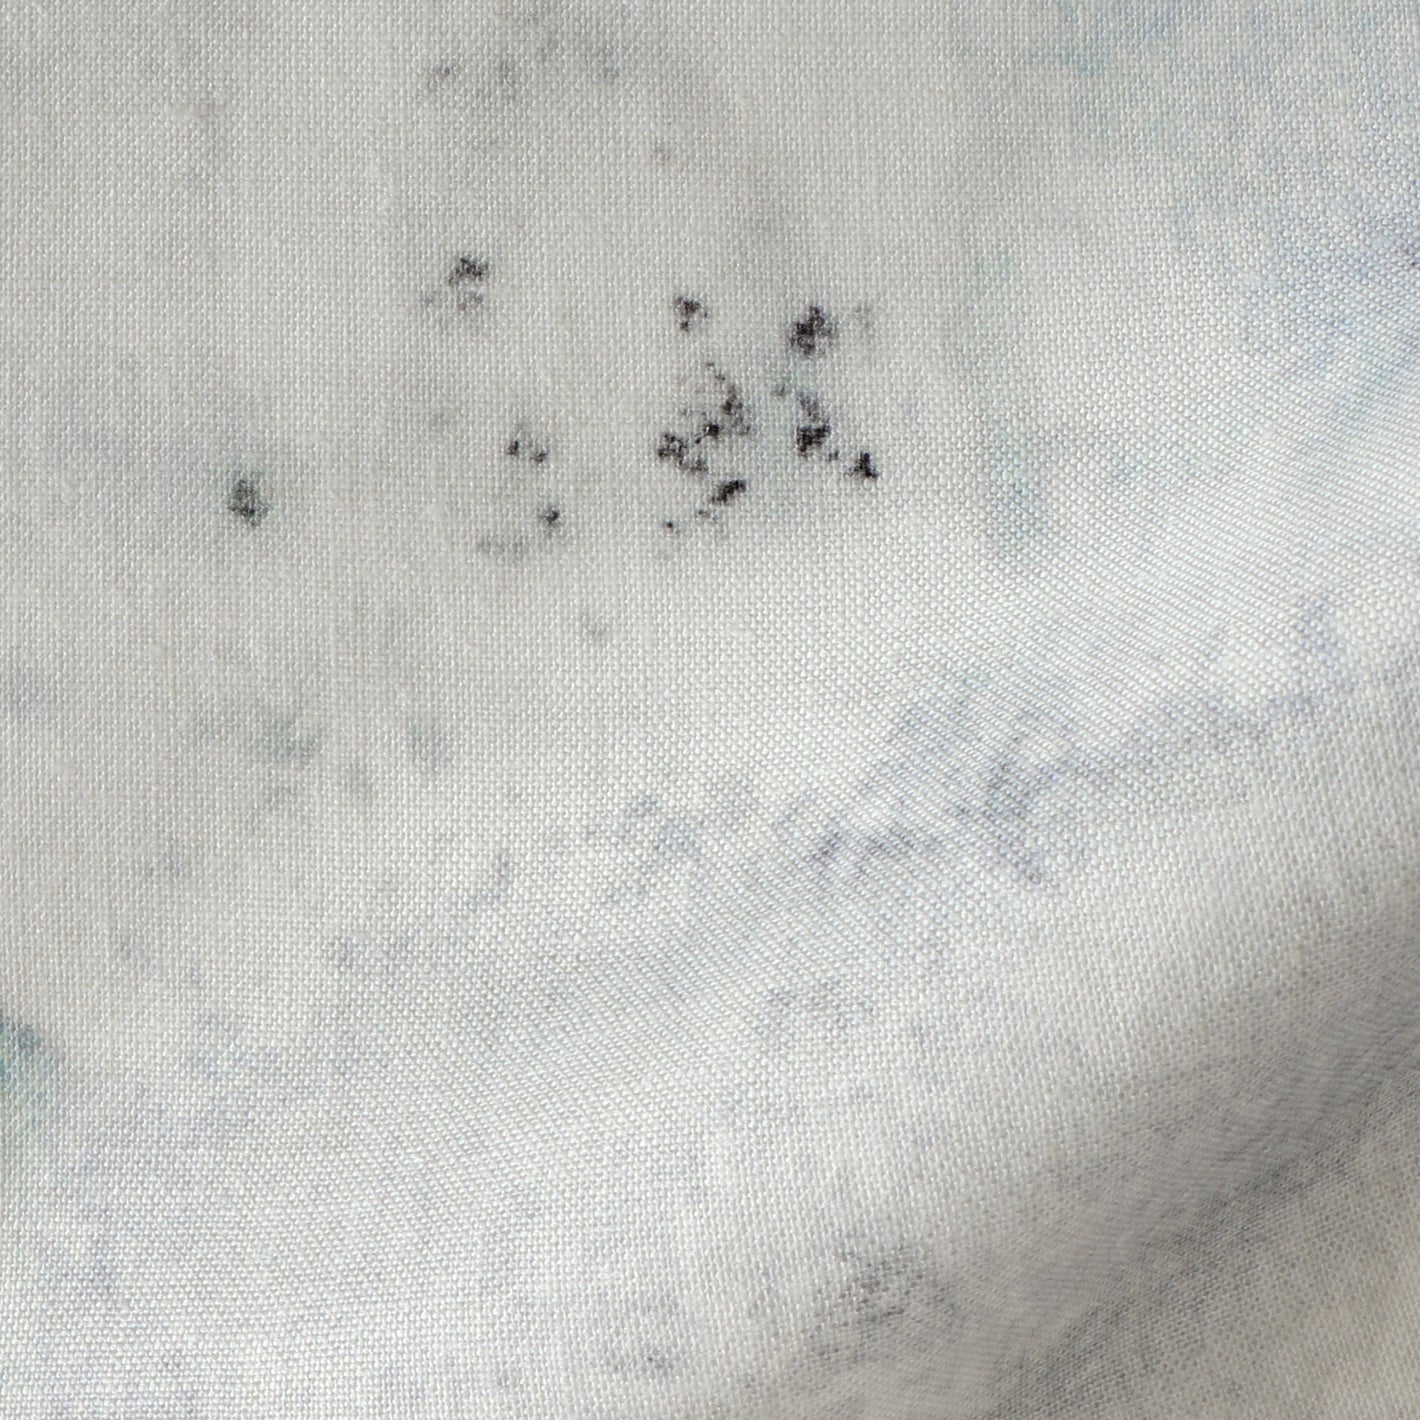 A close up of a white fabric with black spots on it